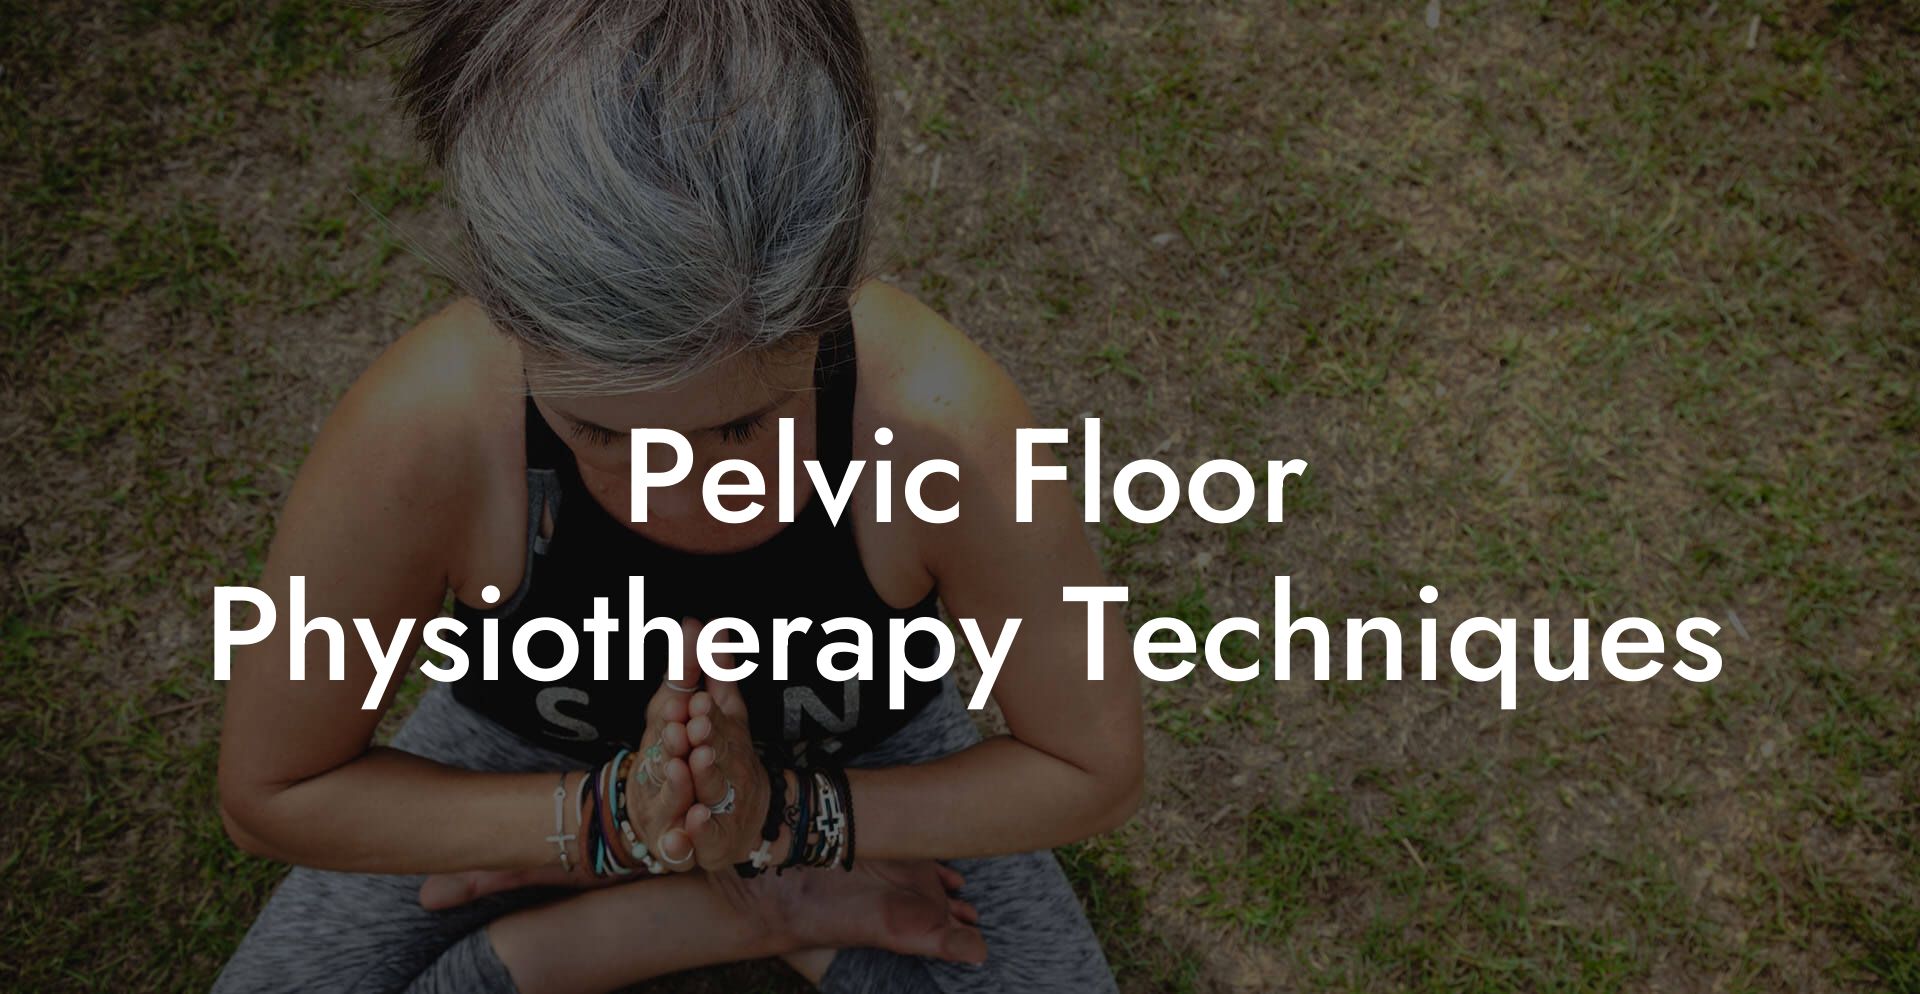 Pelvic Floor Physiotherapy Techniques